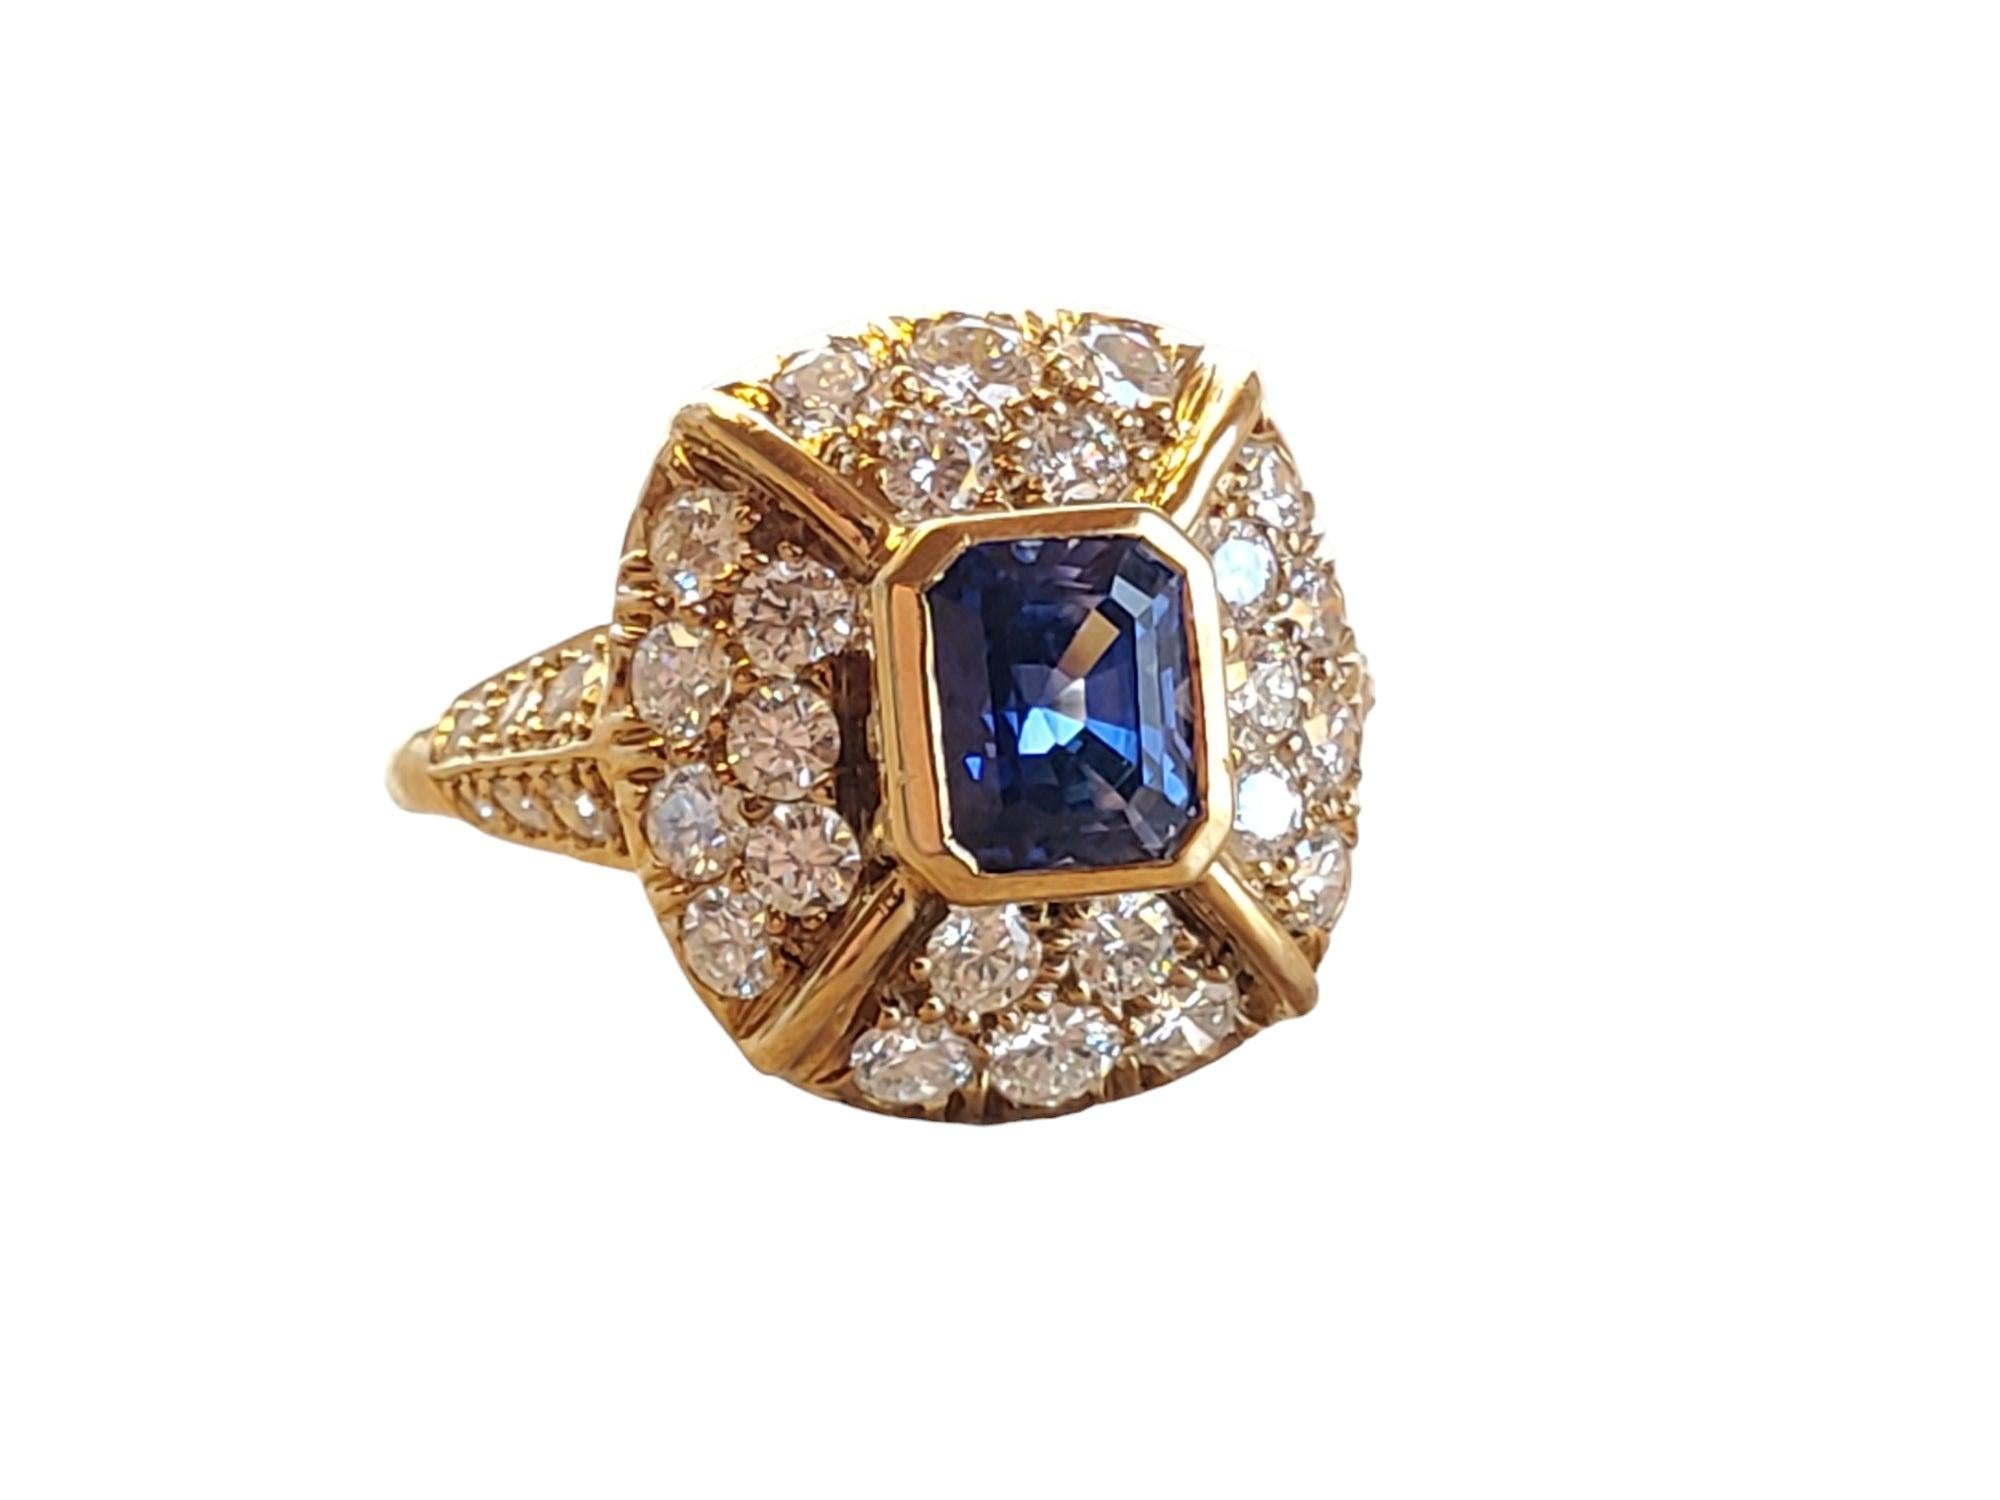 This listing is for an estate 18k yellow gold diamond and sapphire high end designer ring. It has approx. 1.50tcw white VS flush set round brilliant diamonds with a 1.10ct super clean and vibrant emerald cut blue sapphire center stone. The color is